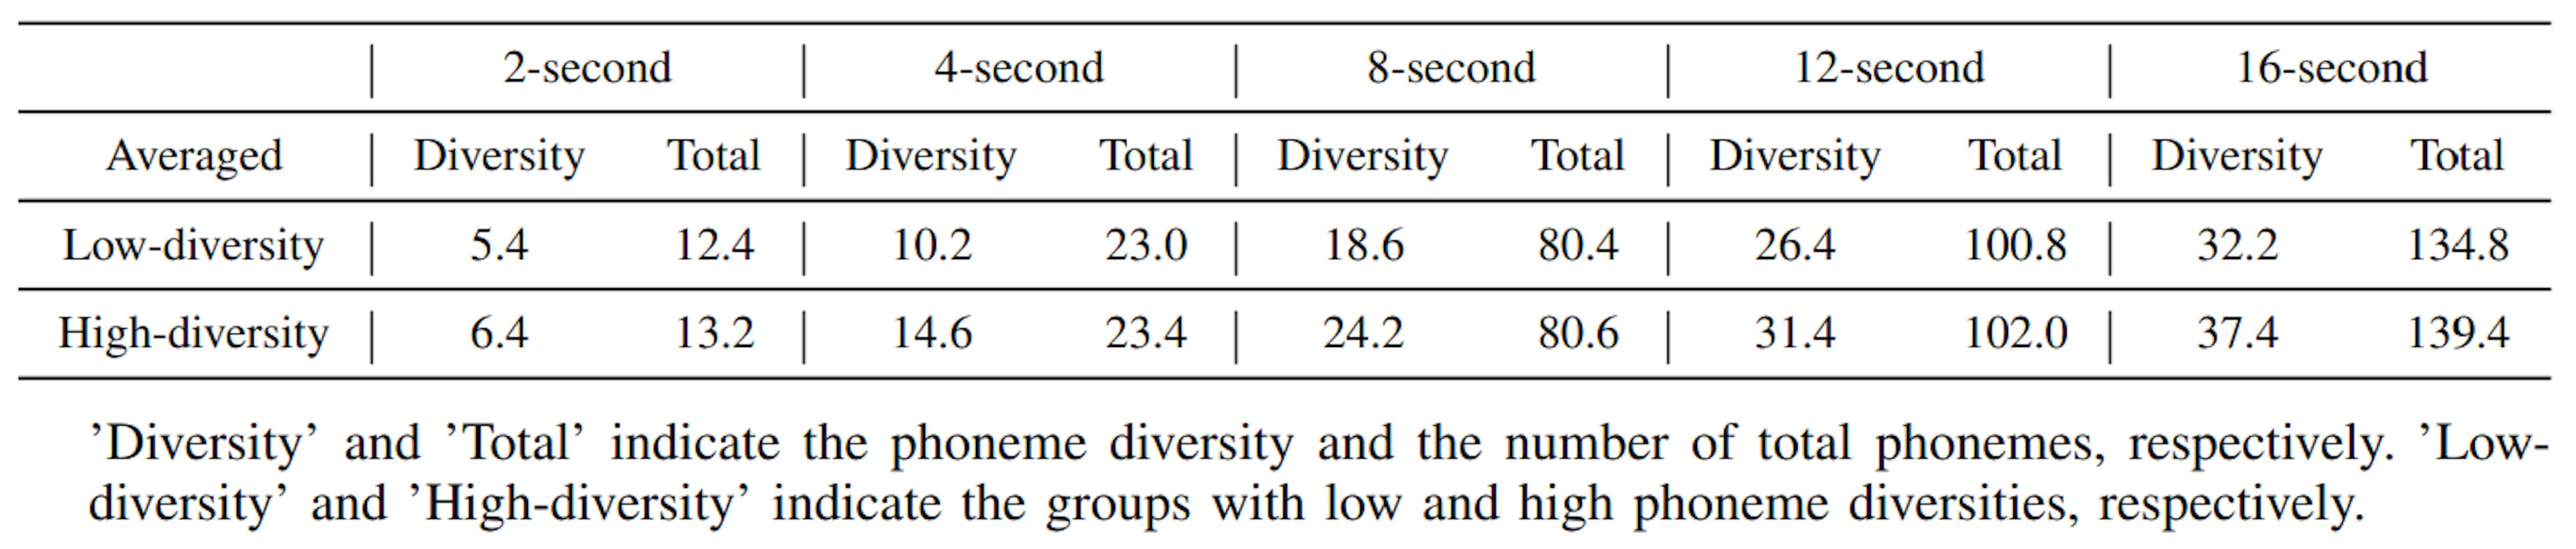 TABLE VI: Phoneme diversities with different speech lengths.